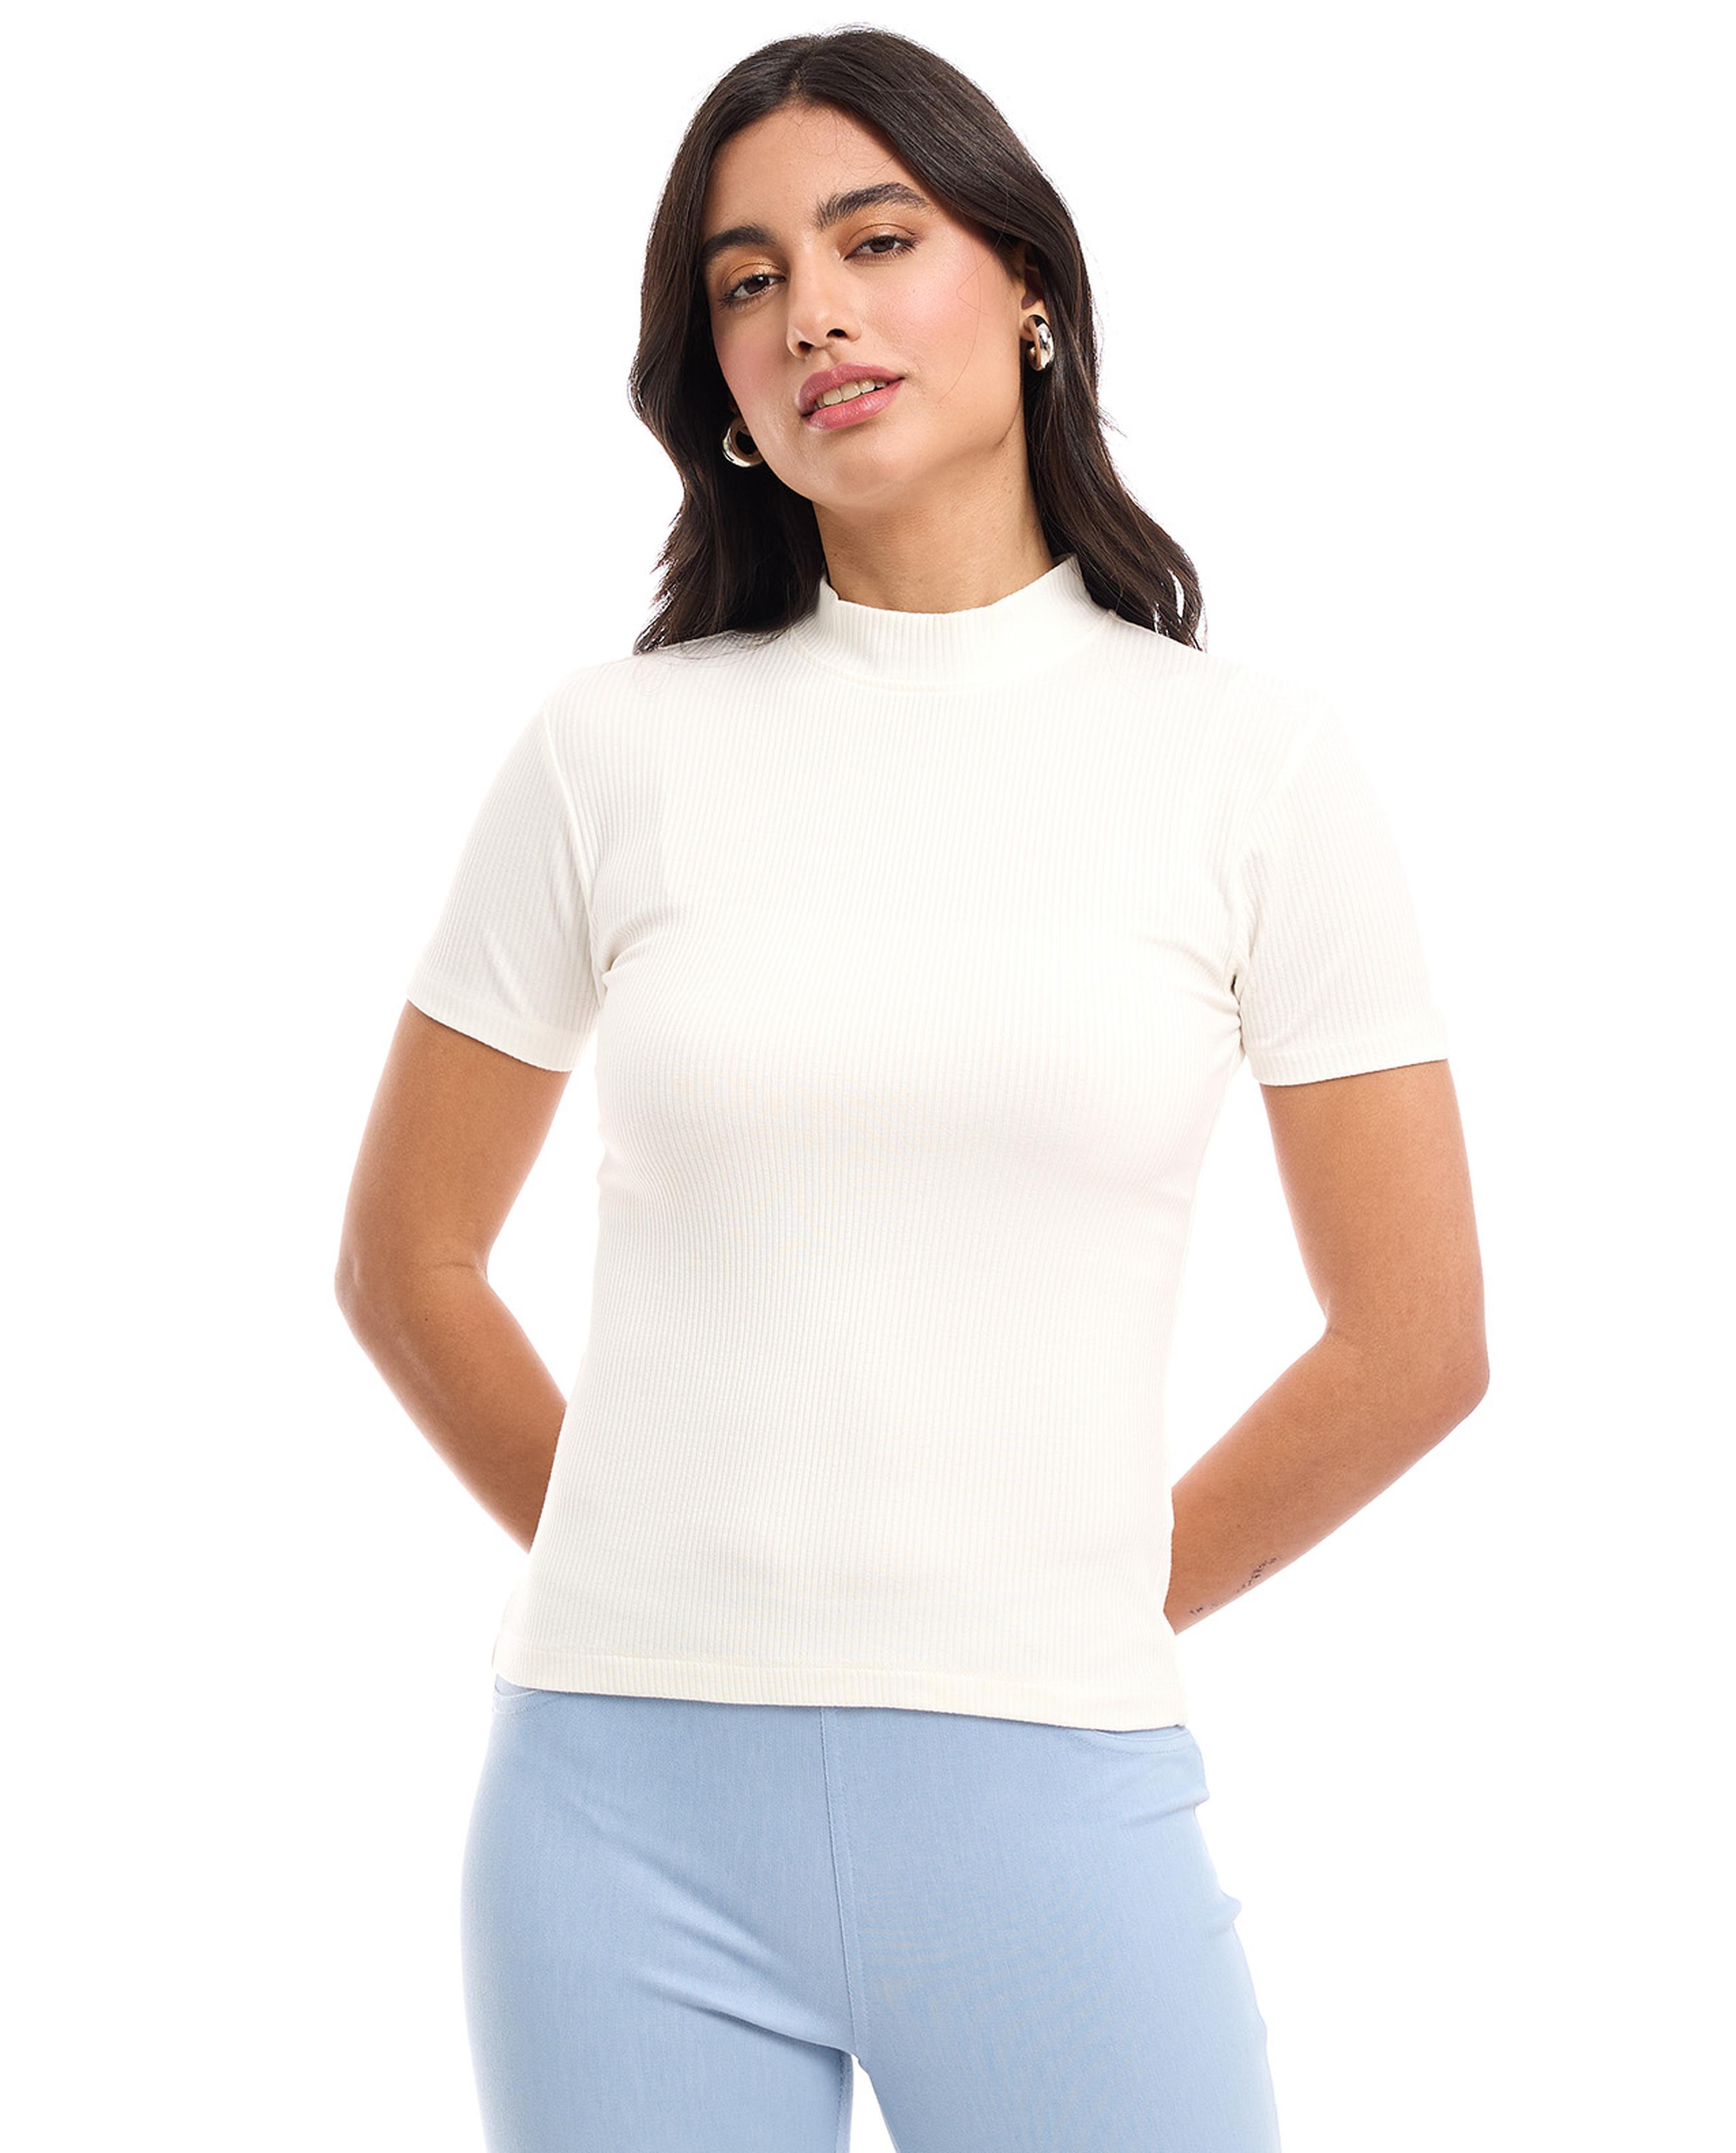 Ribbed Top with Mock Neck and Short Sleeves